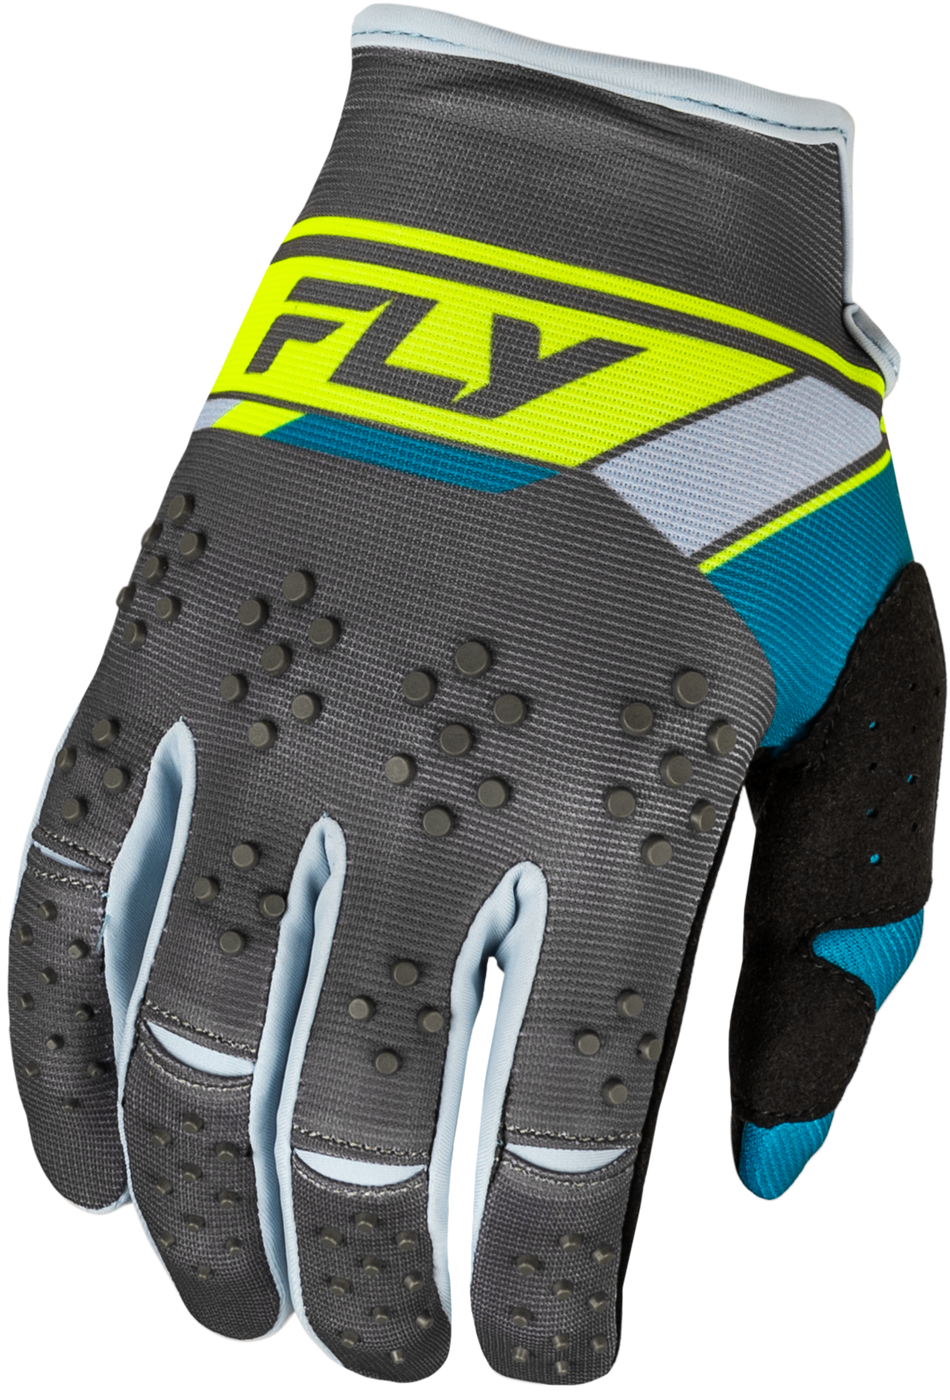 FLY RACING Youth Kinetic Prix Gloves Charcoal/Hi-Vis Ym 377-411YM